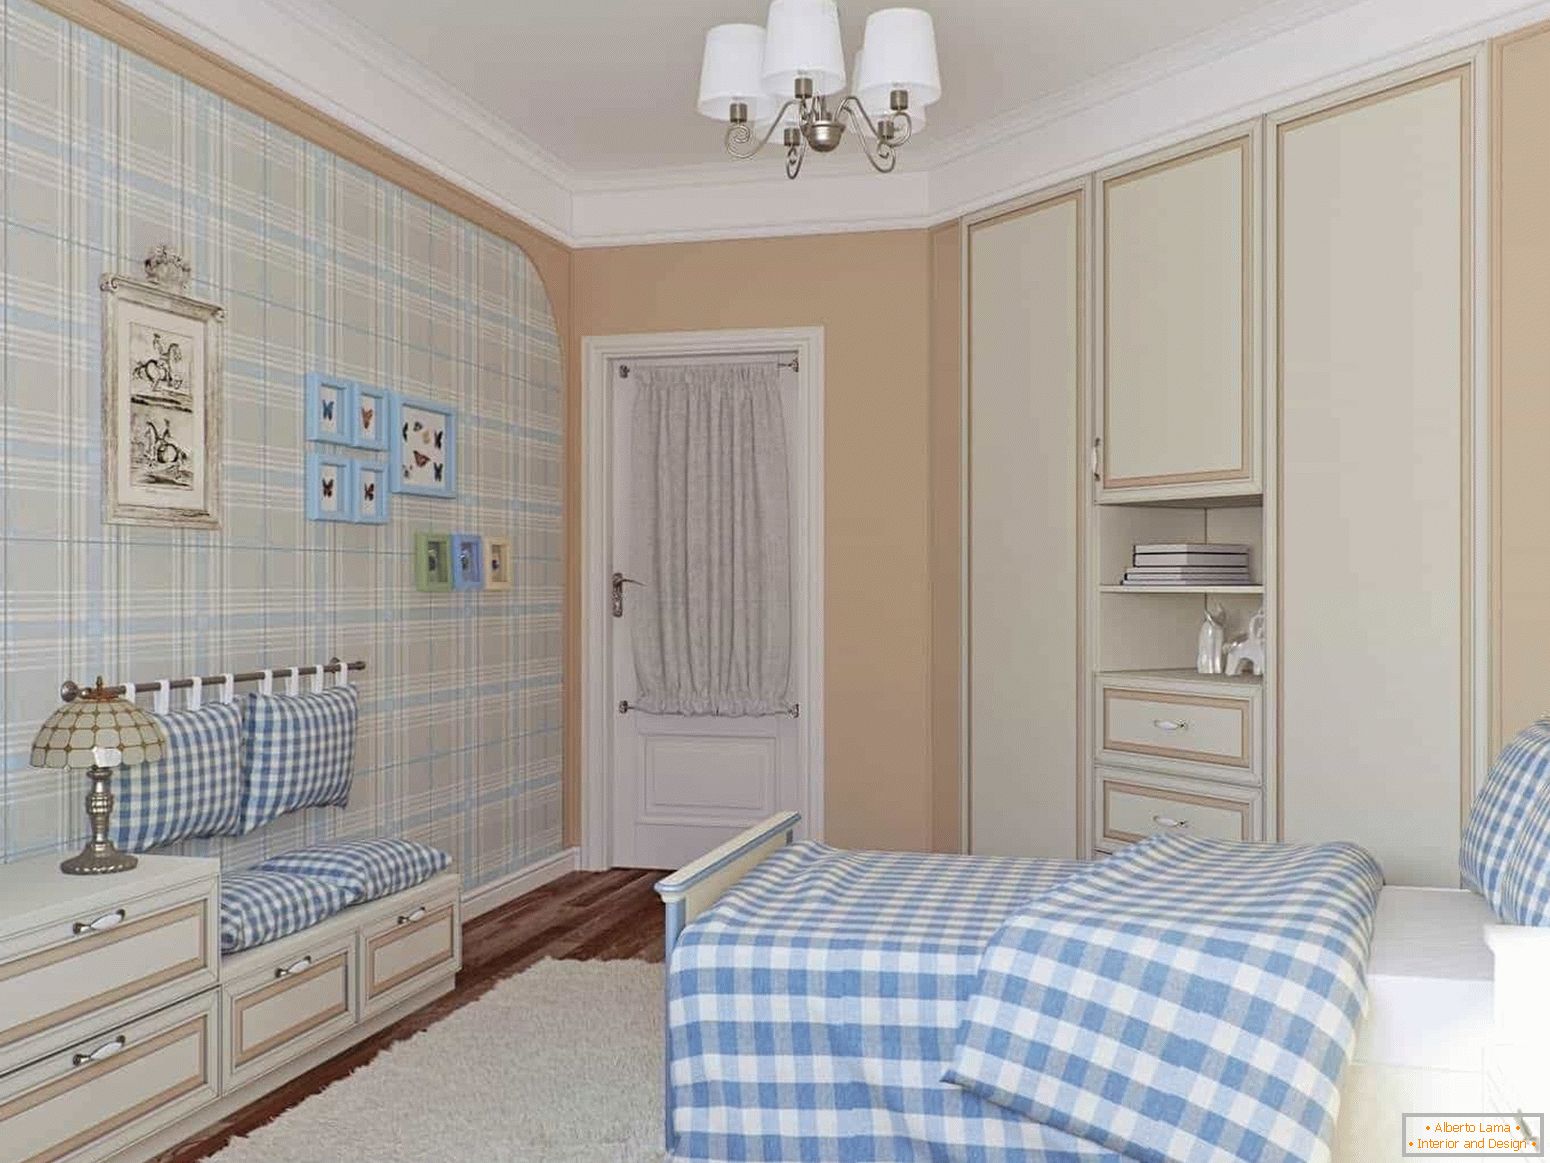 A bedroom for a teenager in the style of Provence